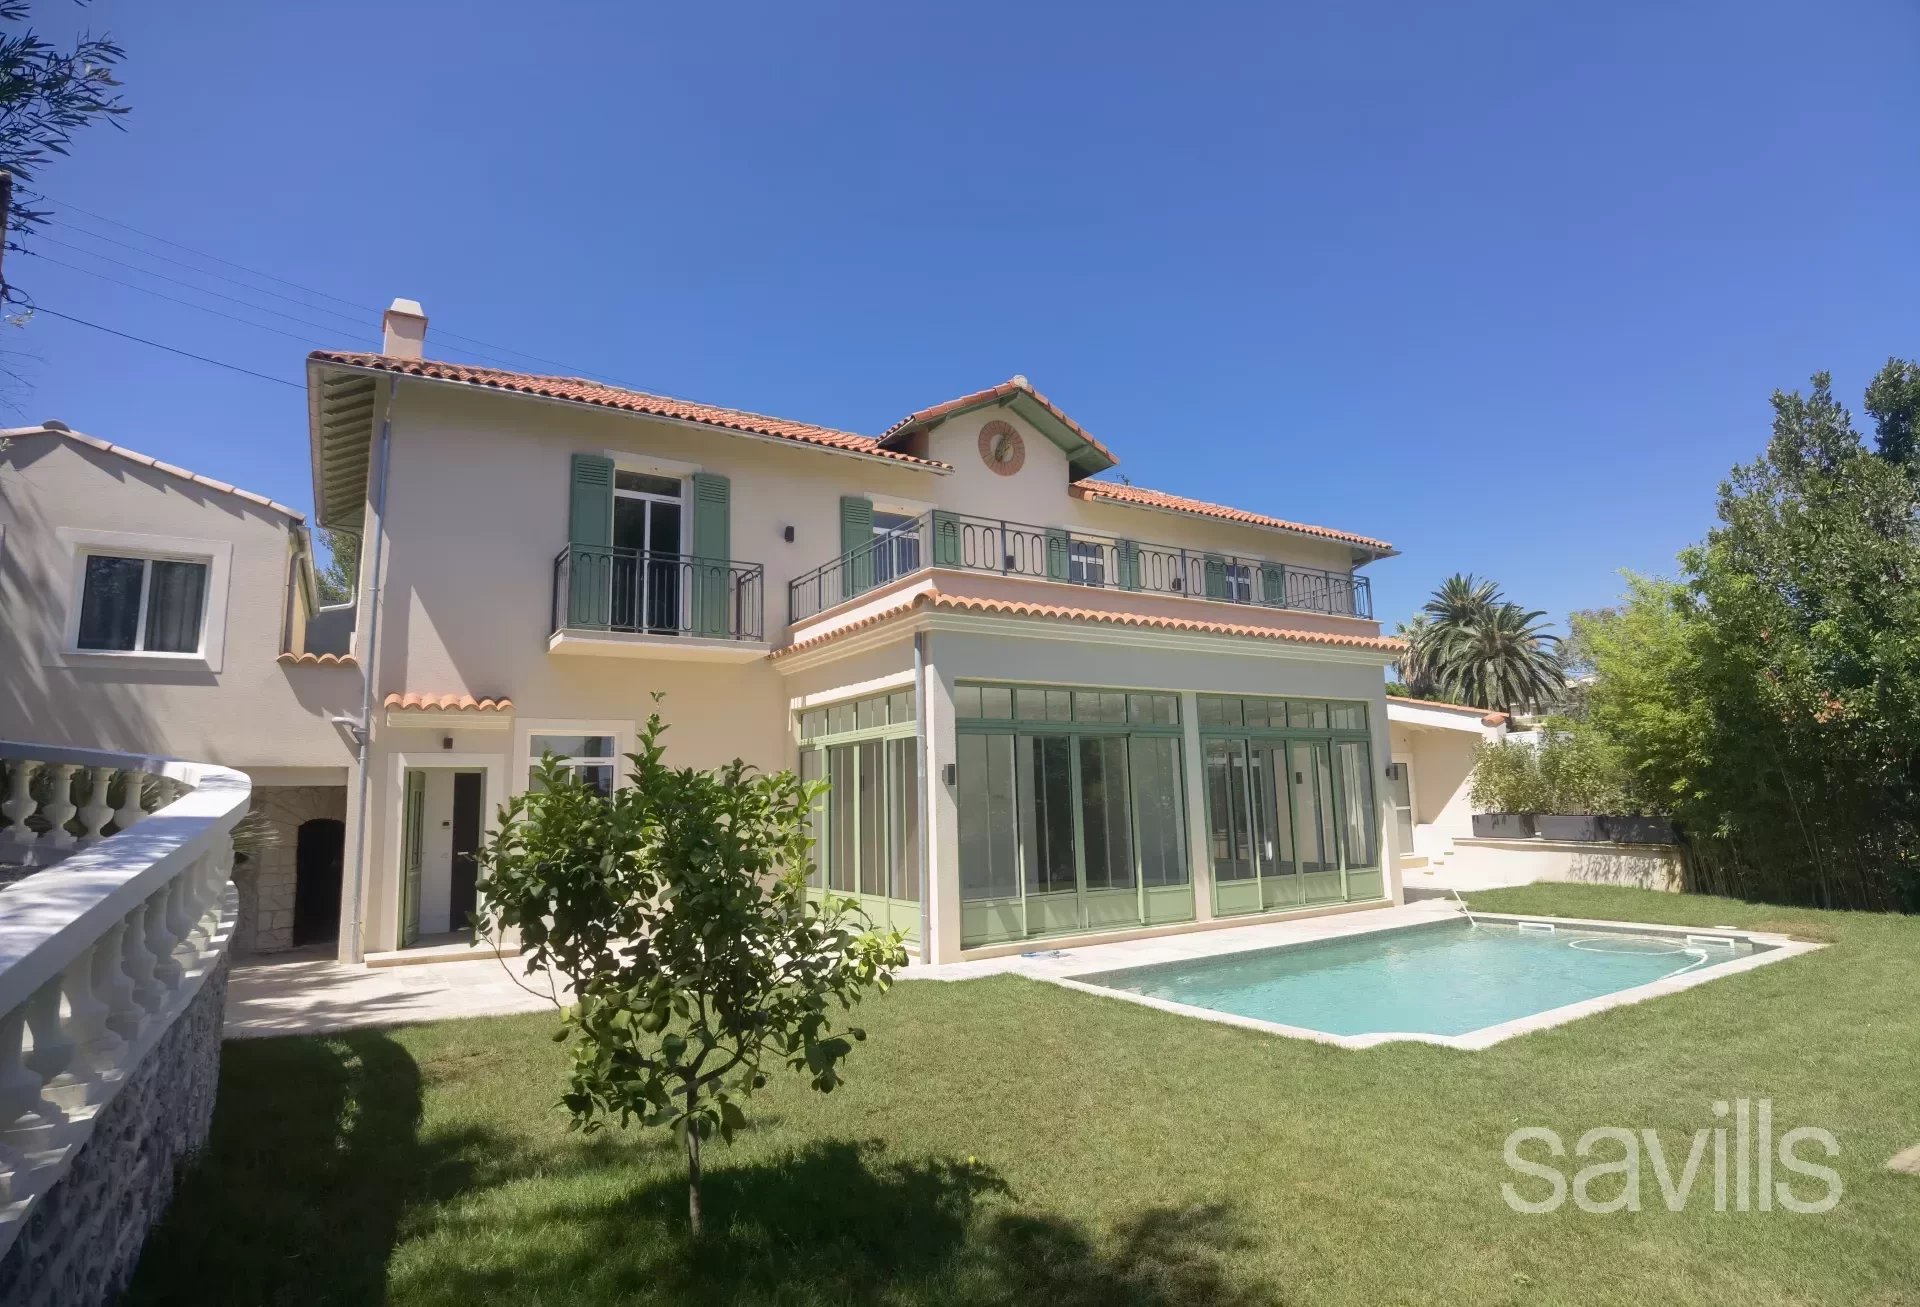 A superb villa, ideally located for the beaches